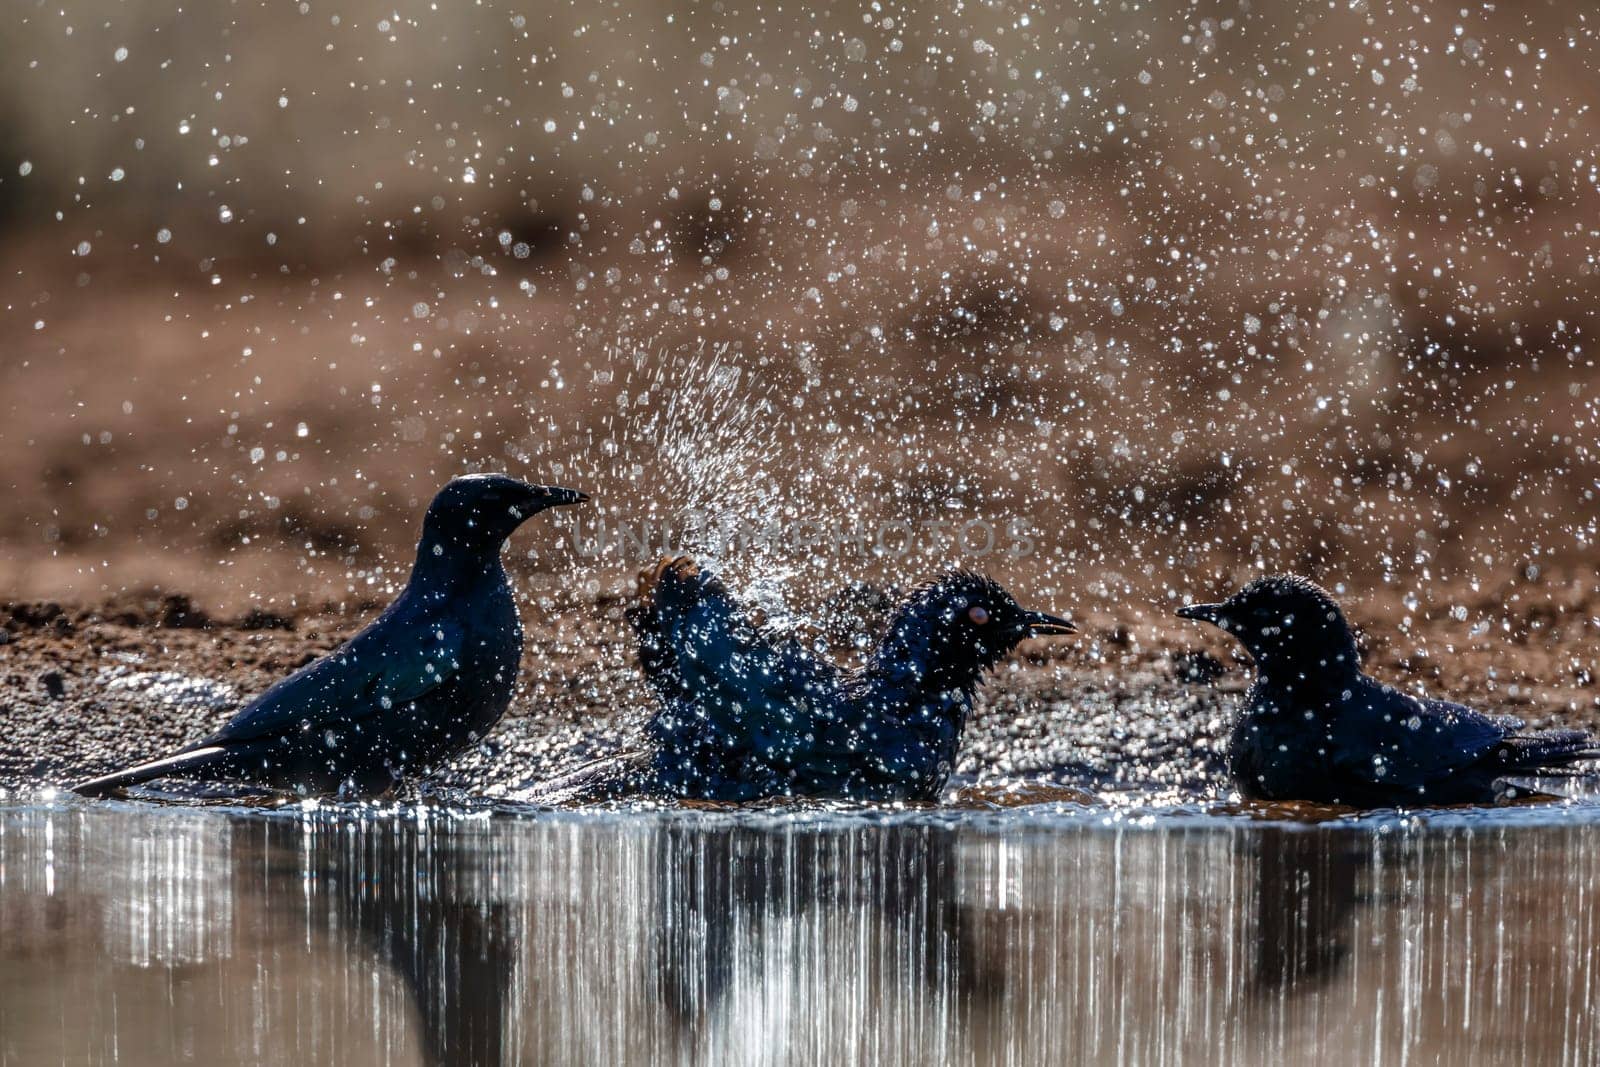 Cape Glossy Starling family bathing splashing droplet in backlit in waterhole in Kruger National park, South Africa ; Specie Lamprotornis nitens family of Sturnidae